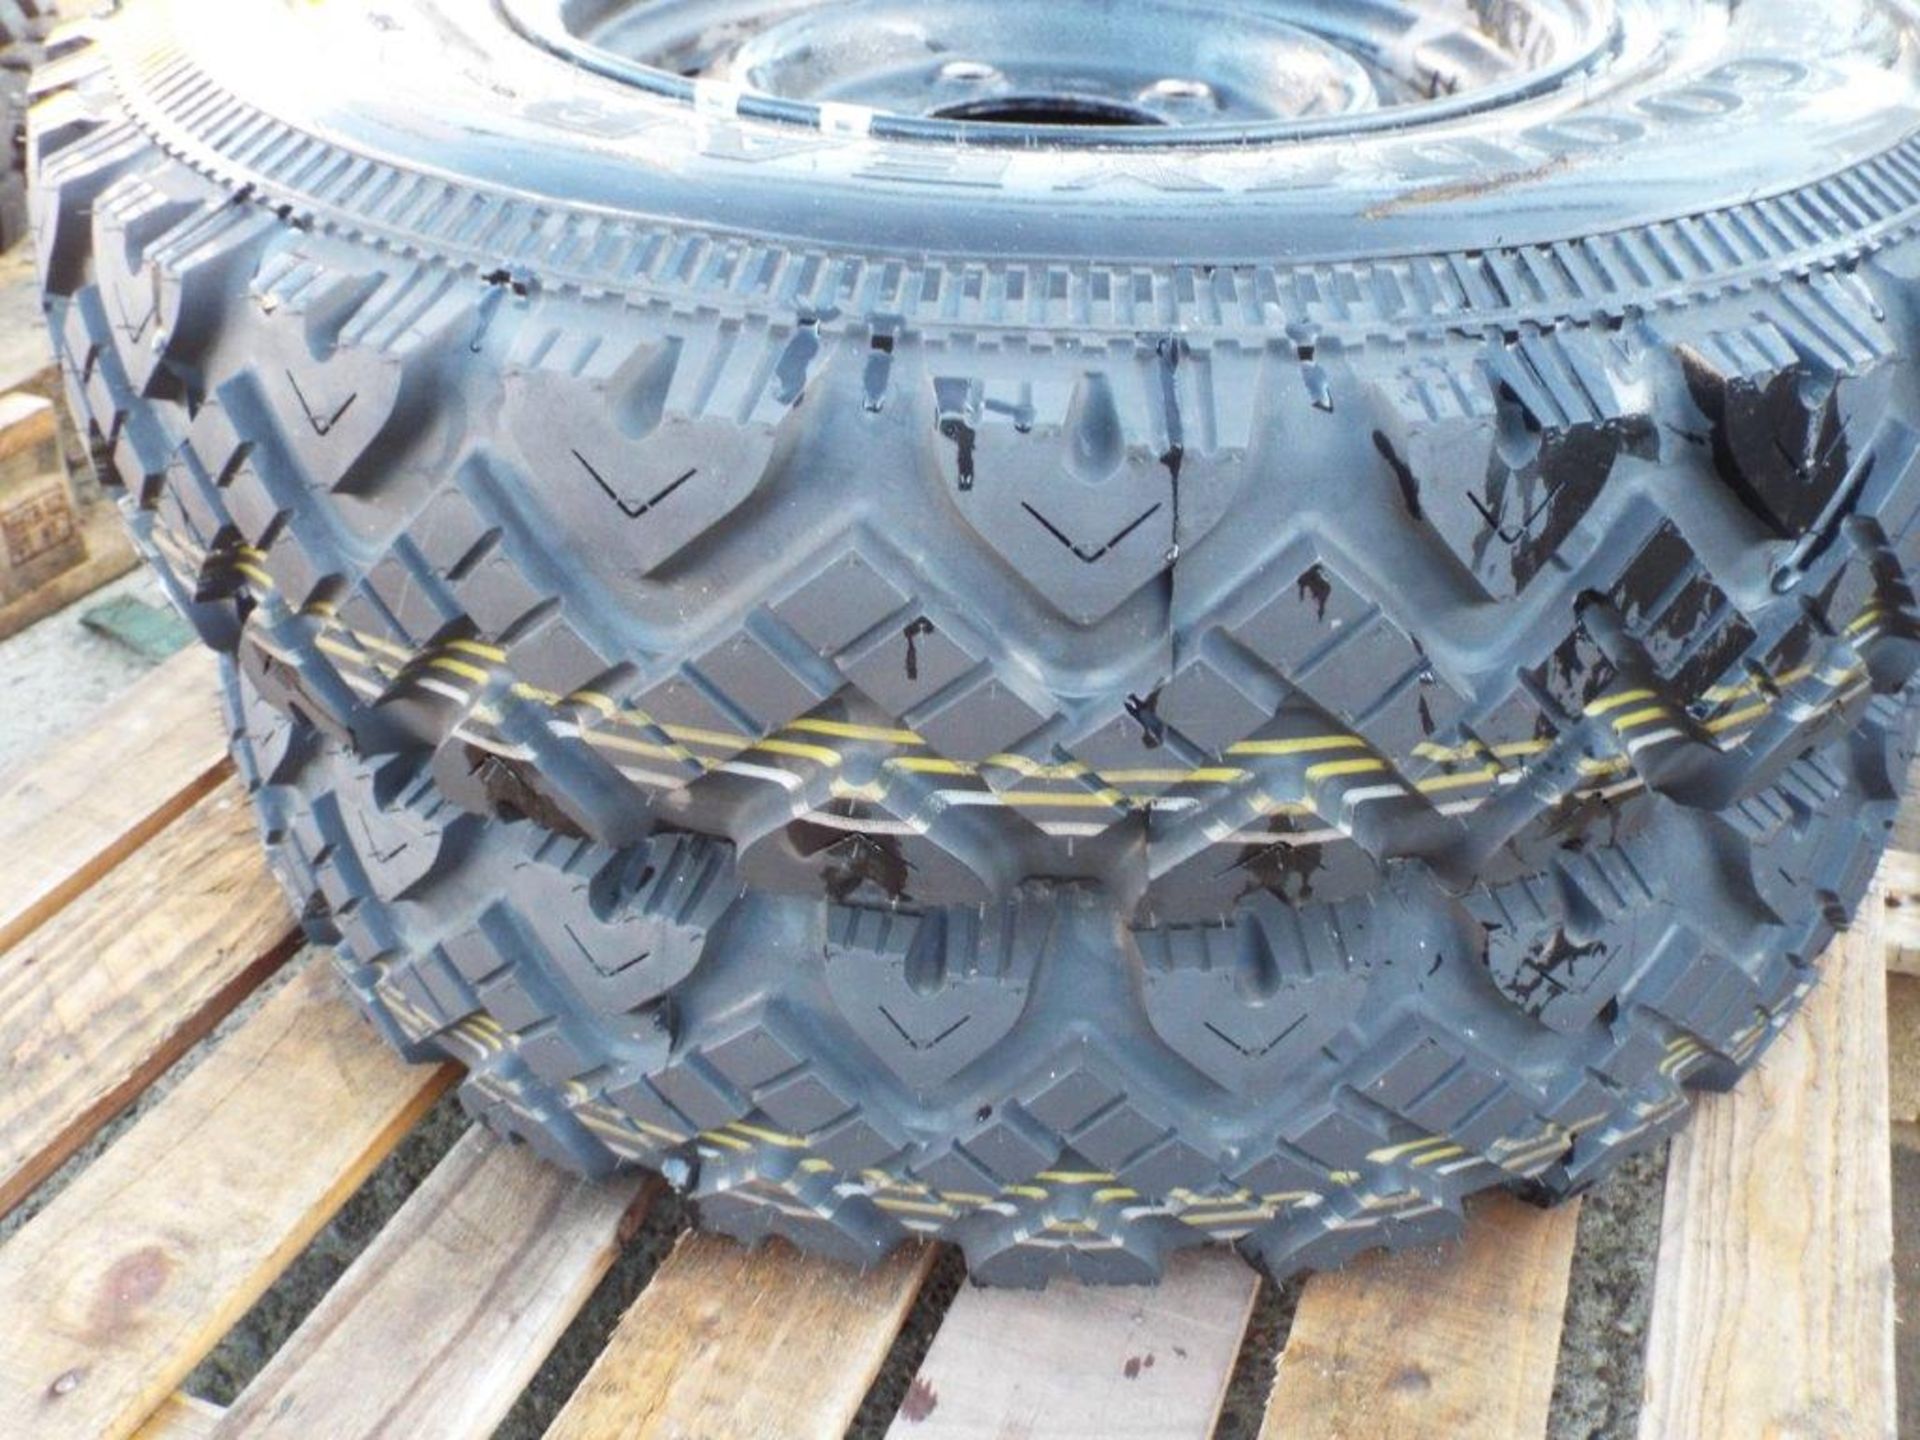 2 x Goodyear G90 7.50R 16C Tyres complete with Wolf Rims - Image 6 of 7